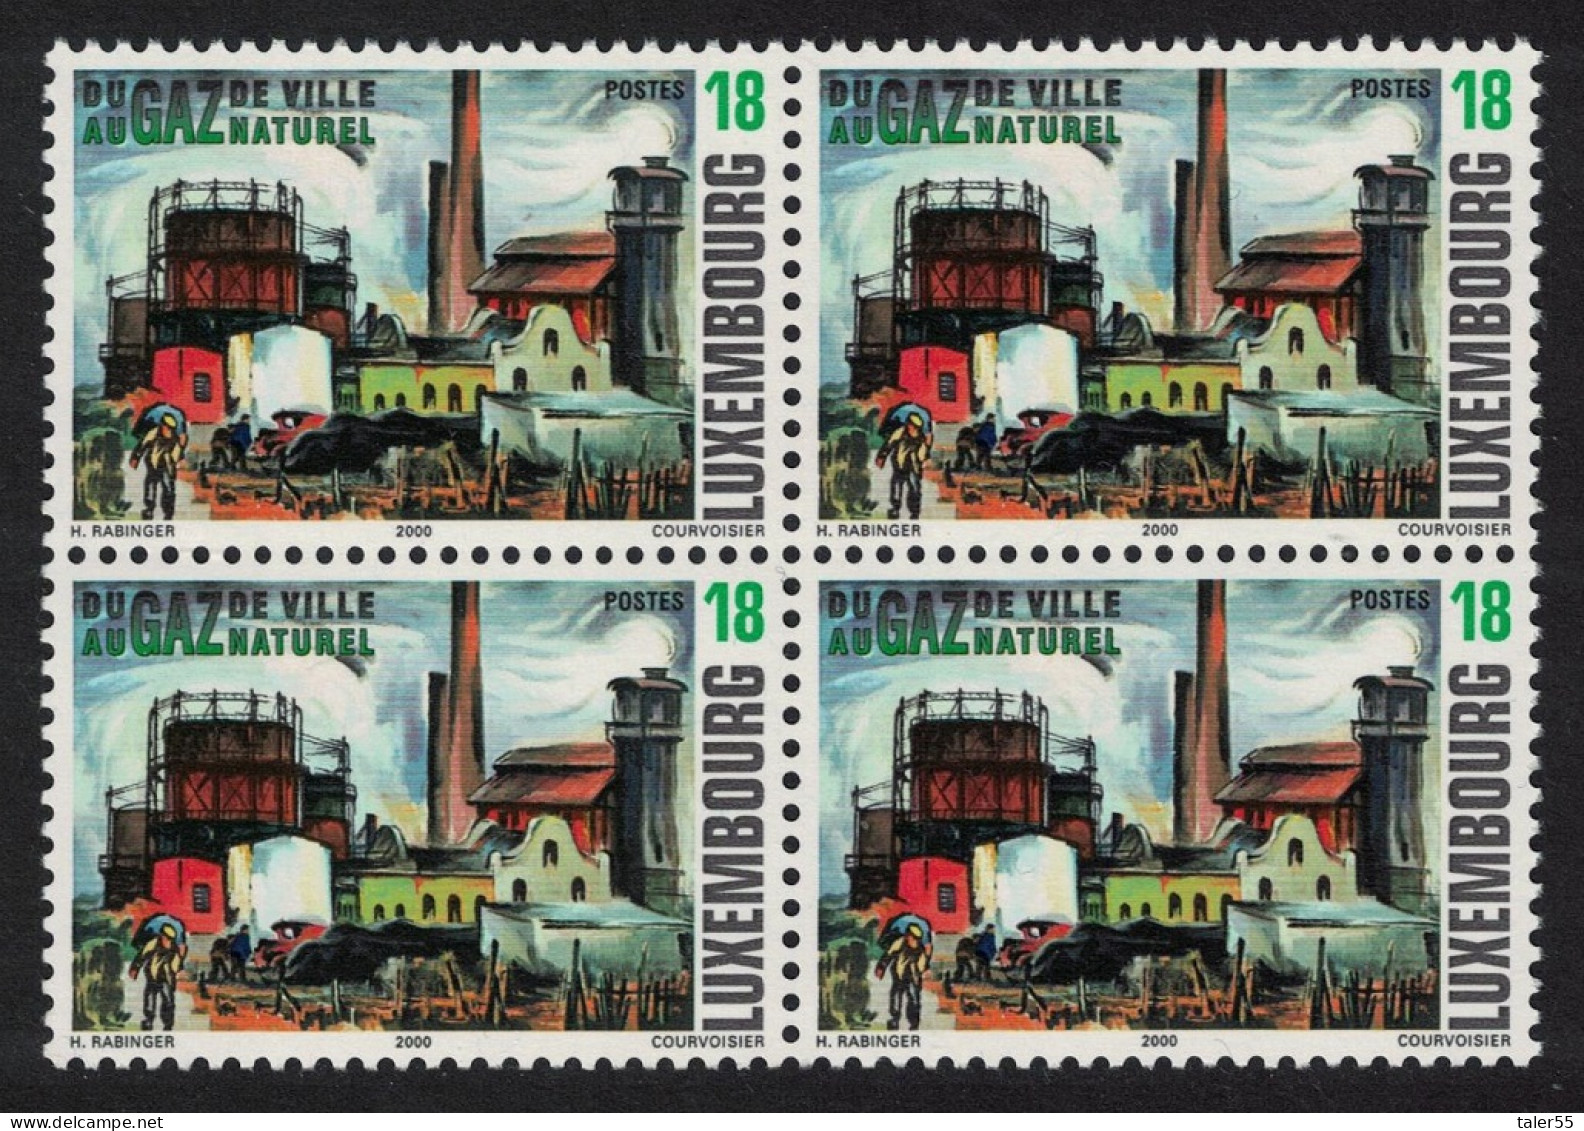 Luxembourg Esch-sur-Alzette Gas Works Block Of 4 2000 MNH SG#1535 MI#1508 - Unused Stamps